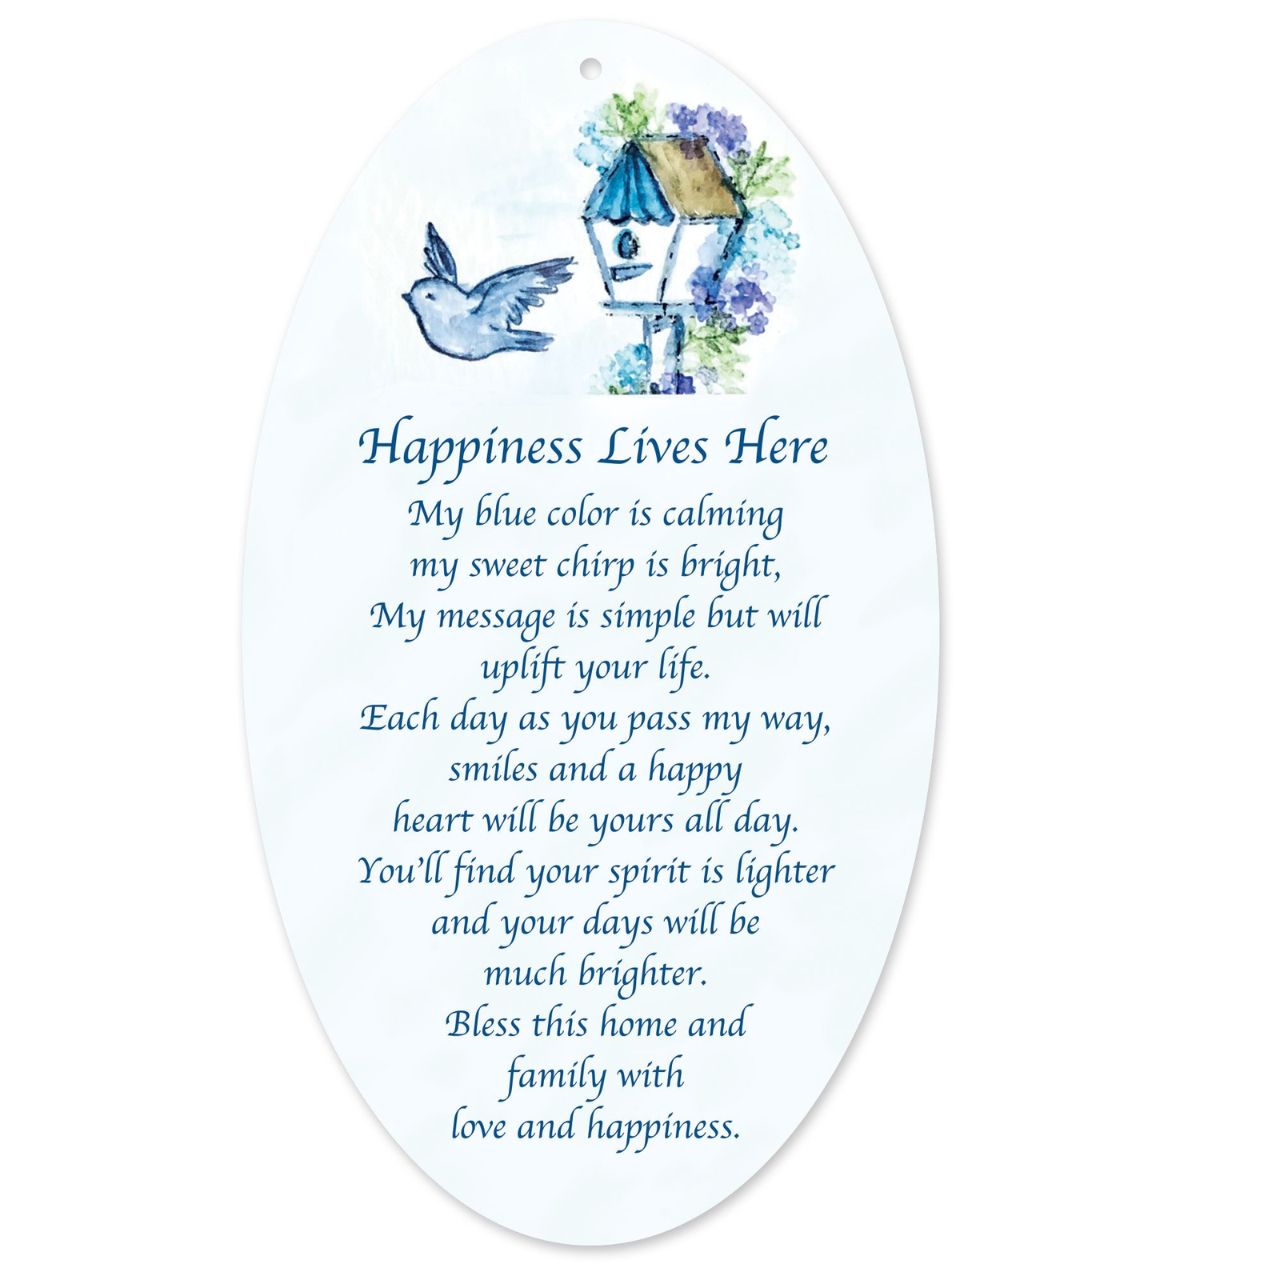 Messenger Bluebird Hanging Ornament  Gorgeous 'Happiness Lives Here' Bluebird. Made from stunning acrylic, each facet catching the light. With a sentiment card attached to each, these are the perfect gift to brighten anyones day. 'My blue colour is calming, my sweet chirp is bright.